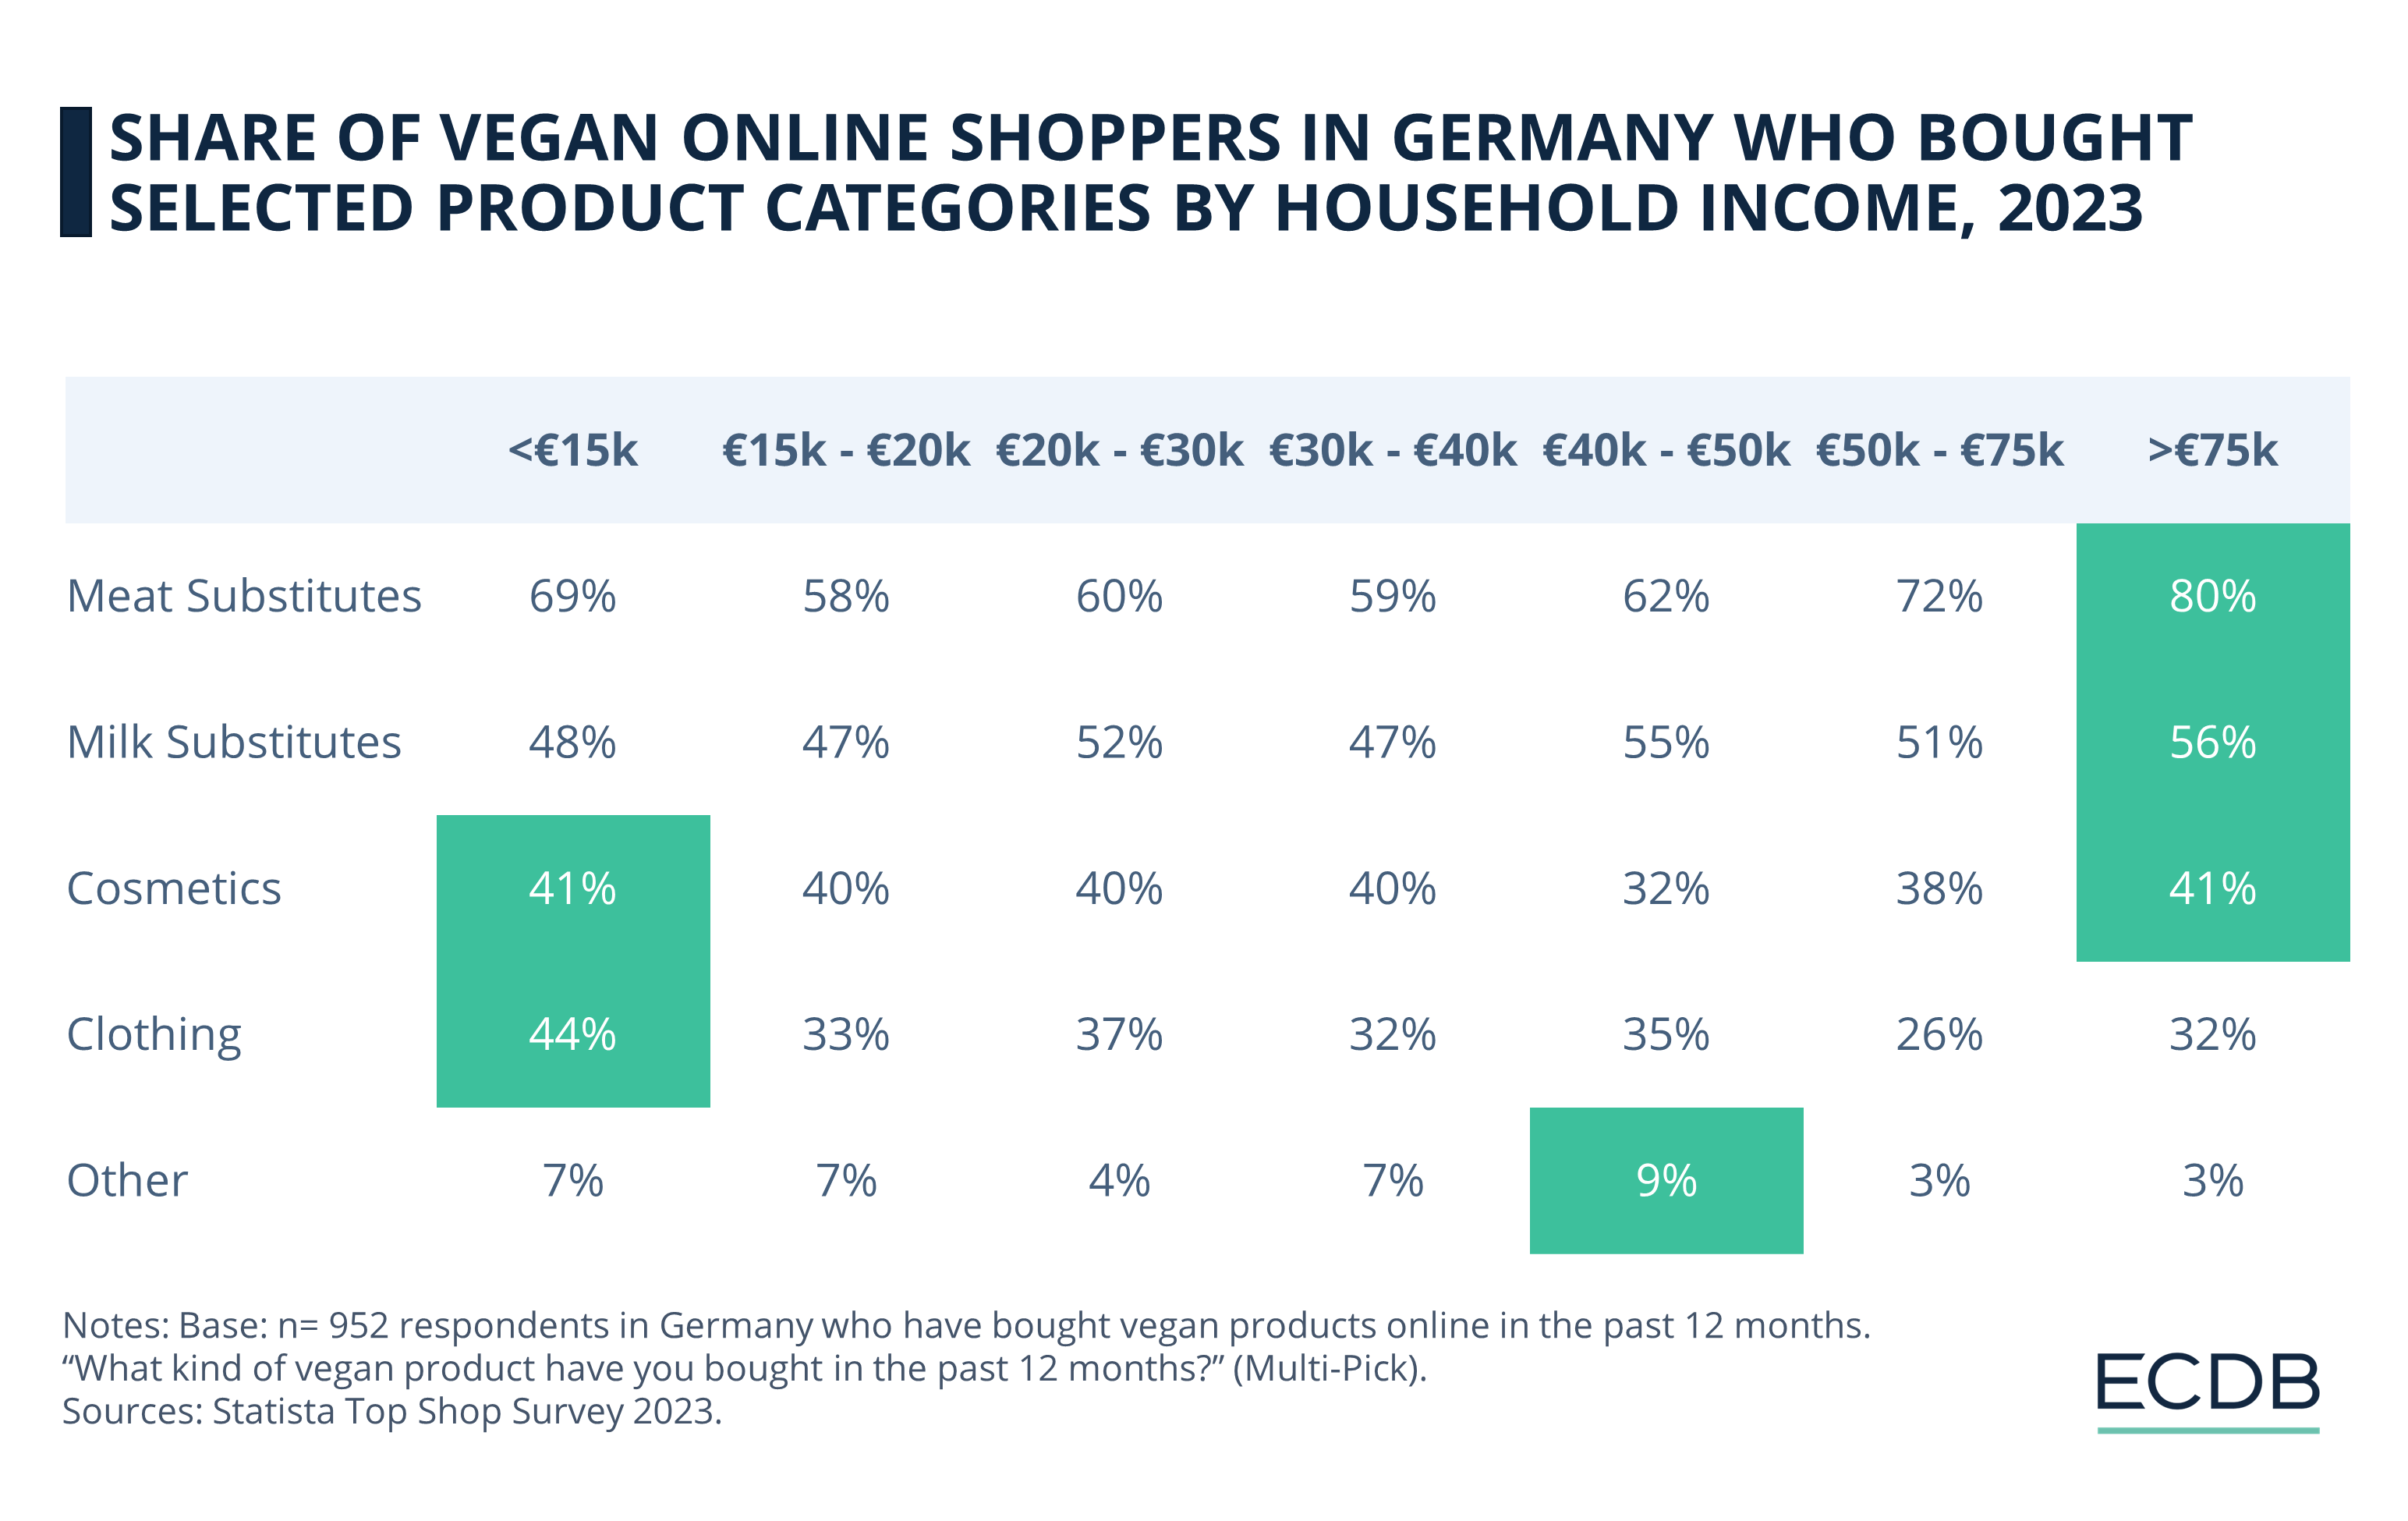 Share of Vegan Online Shoppers in Germany Who Bought Selected Product Categories by Household Income, 2023